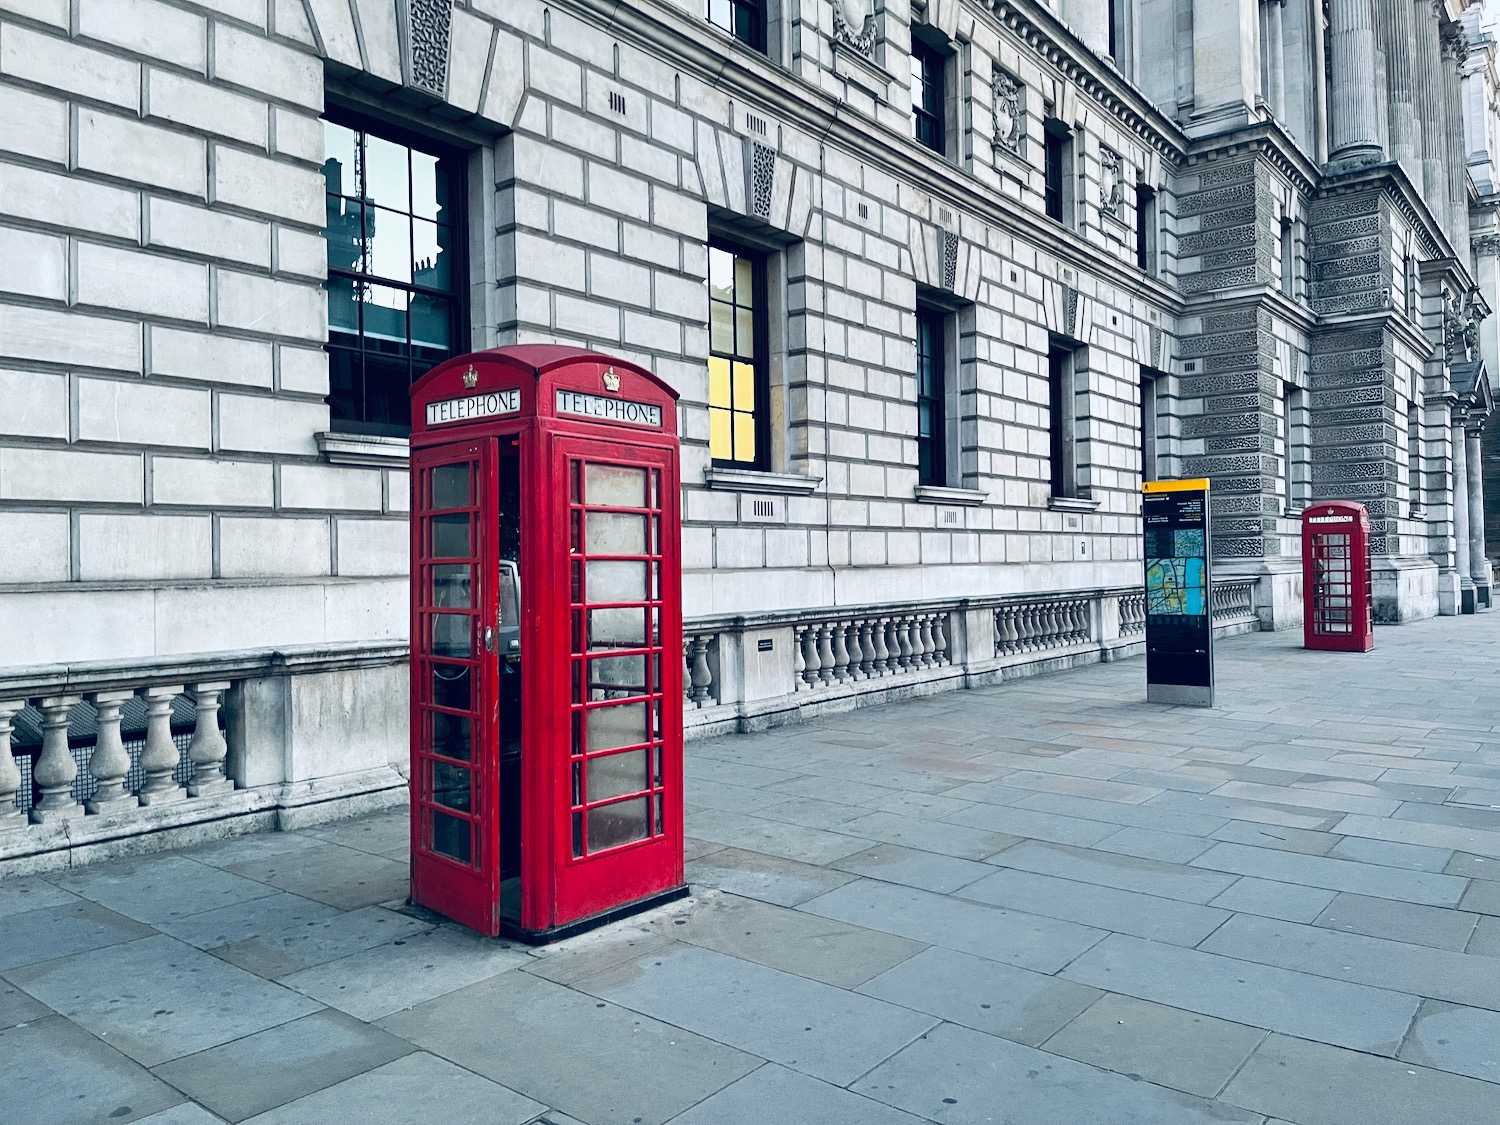 a red telephone booth in front of a stone building